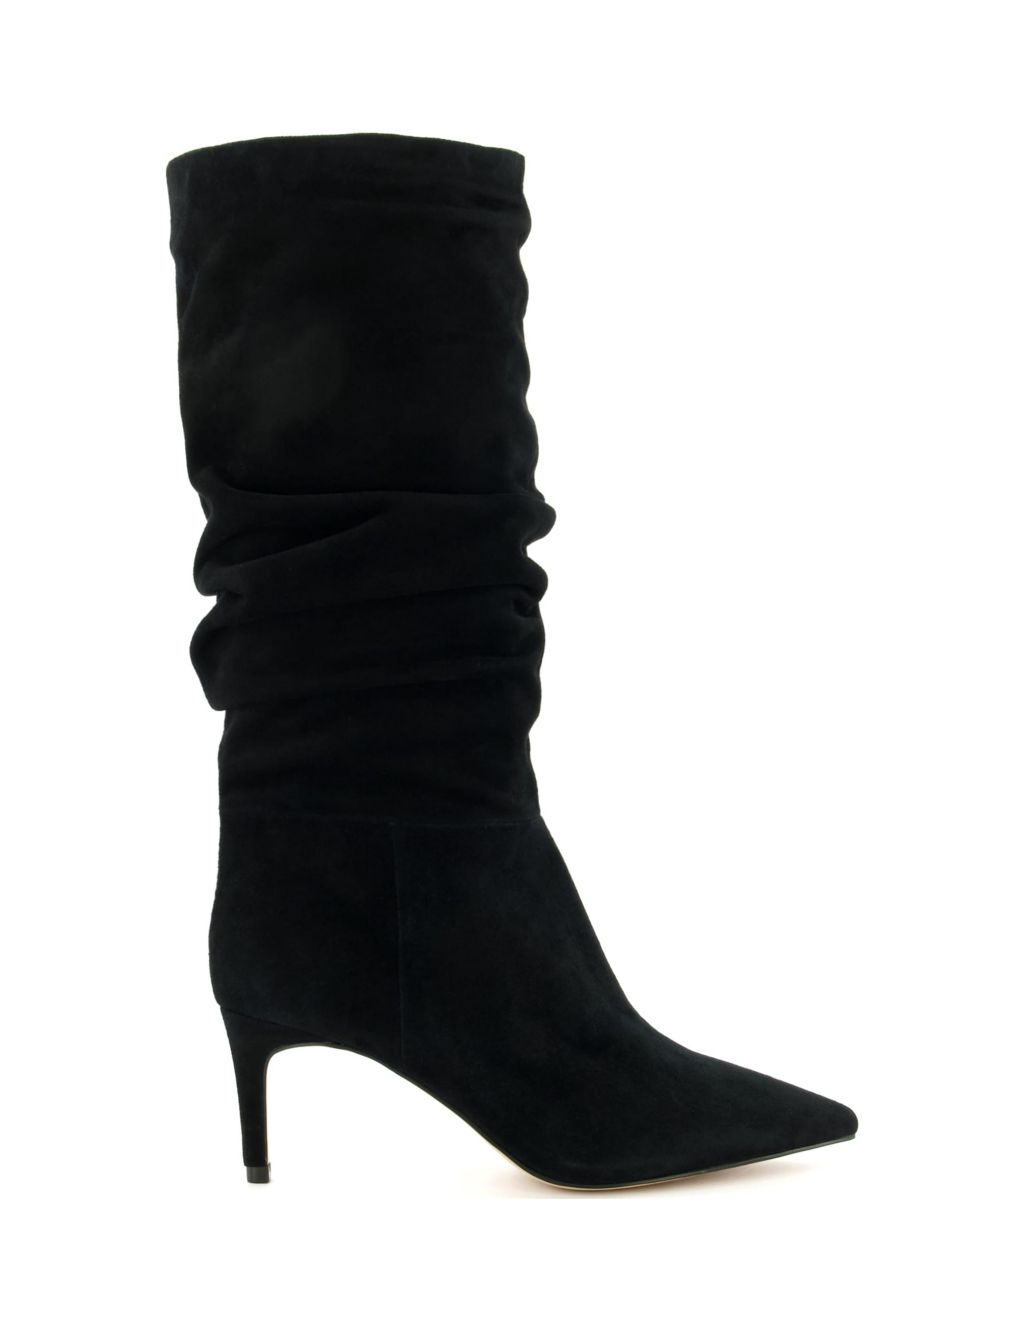 Suede Stiletto Heel Pointed Knee High Boots image 1